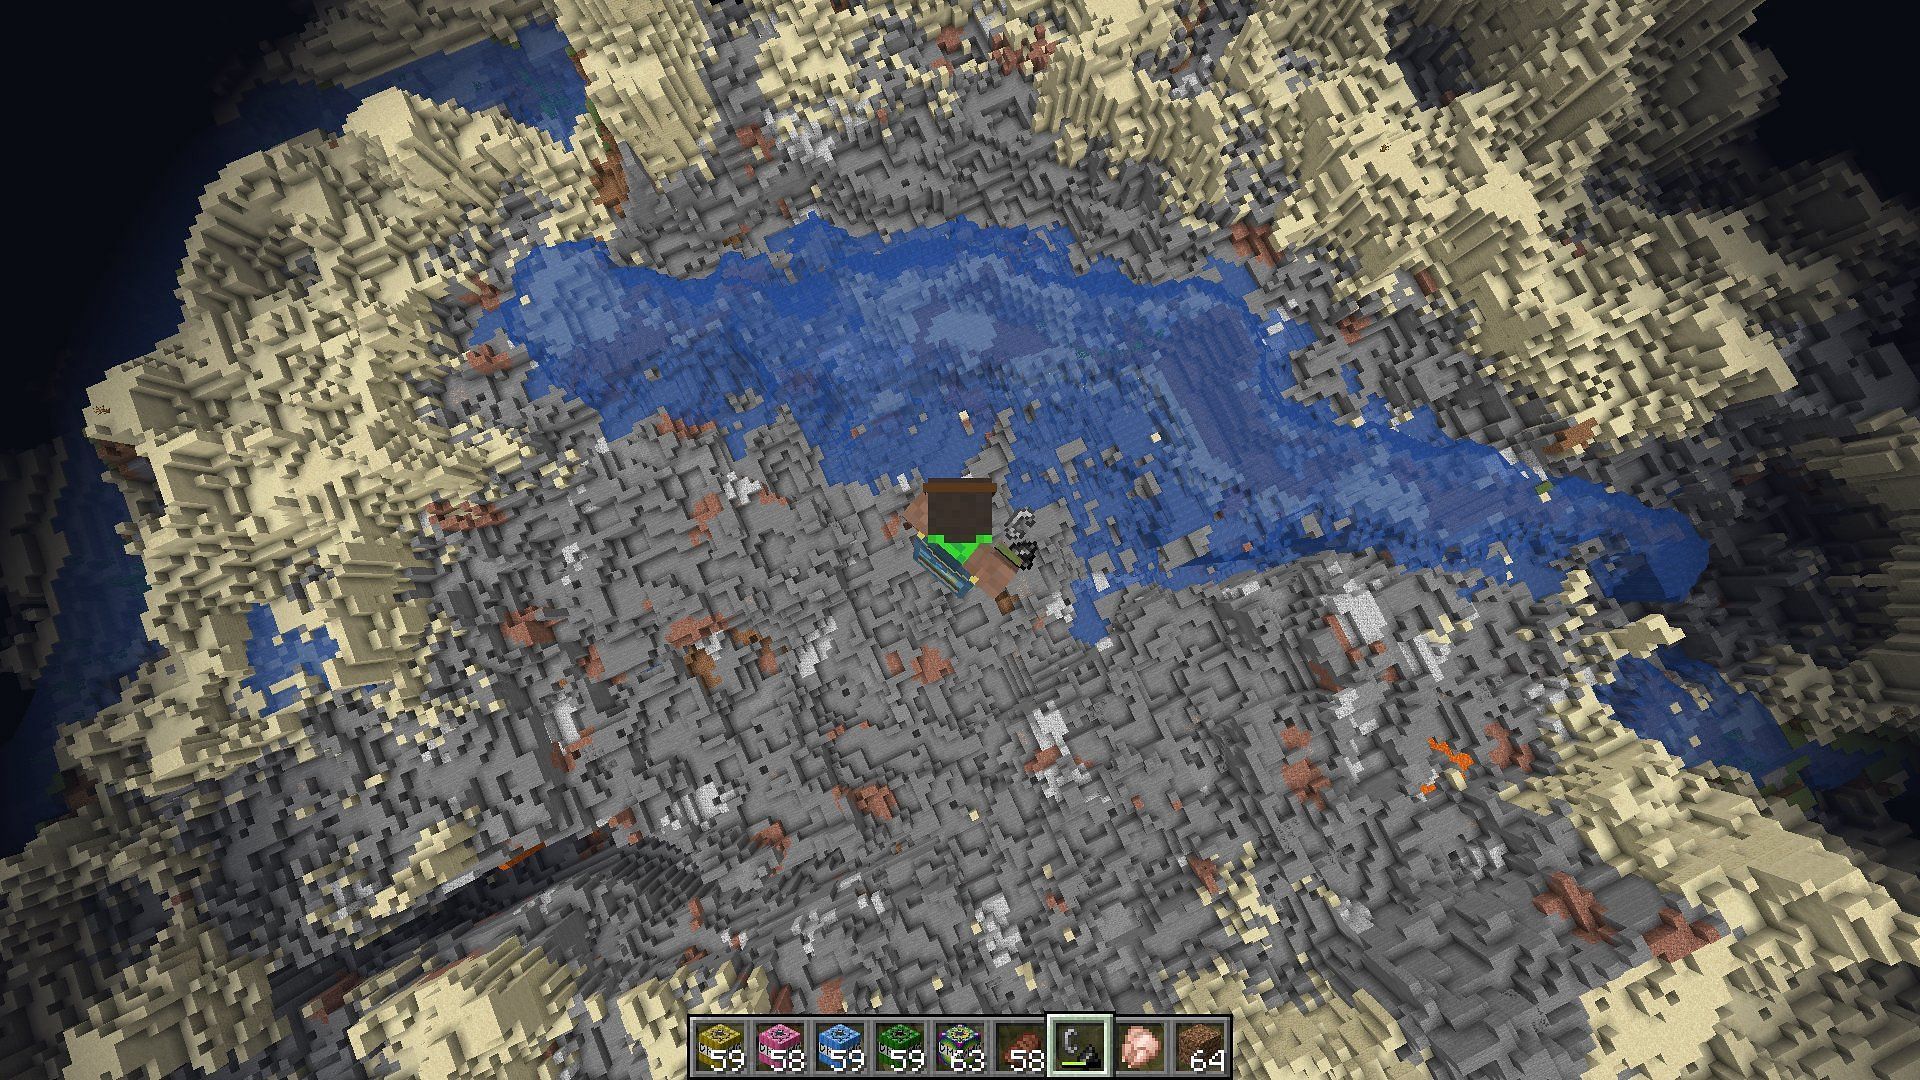 The biggest TNT explosion possible with the Minecraft mod (Image via CurseForge)